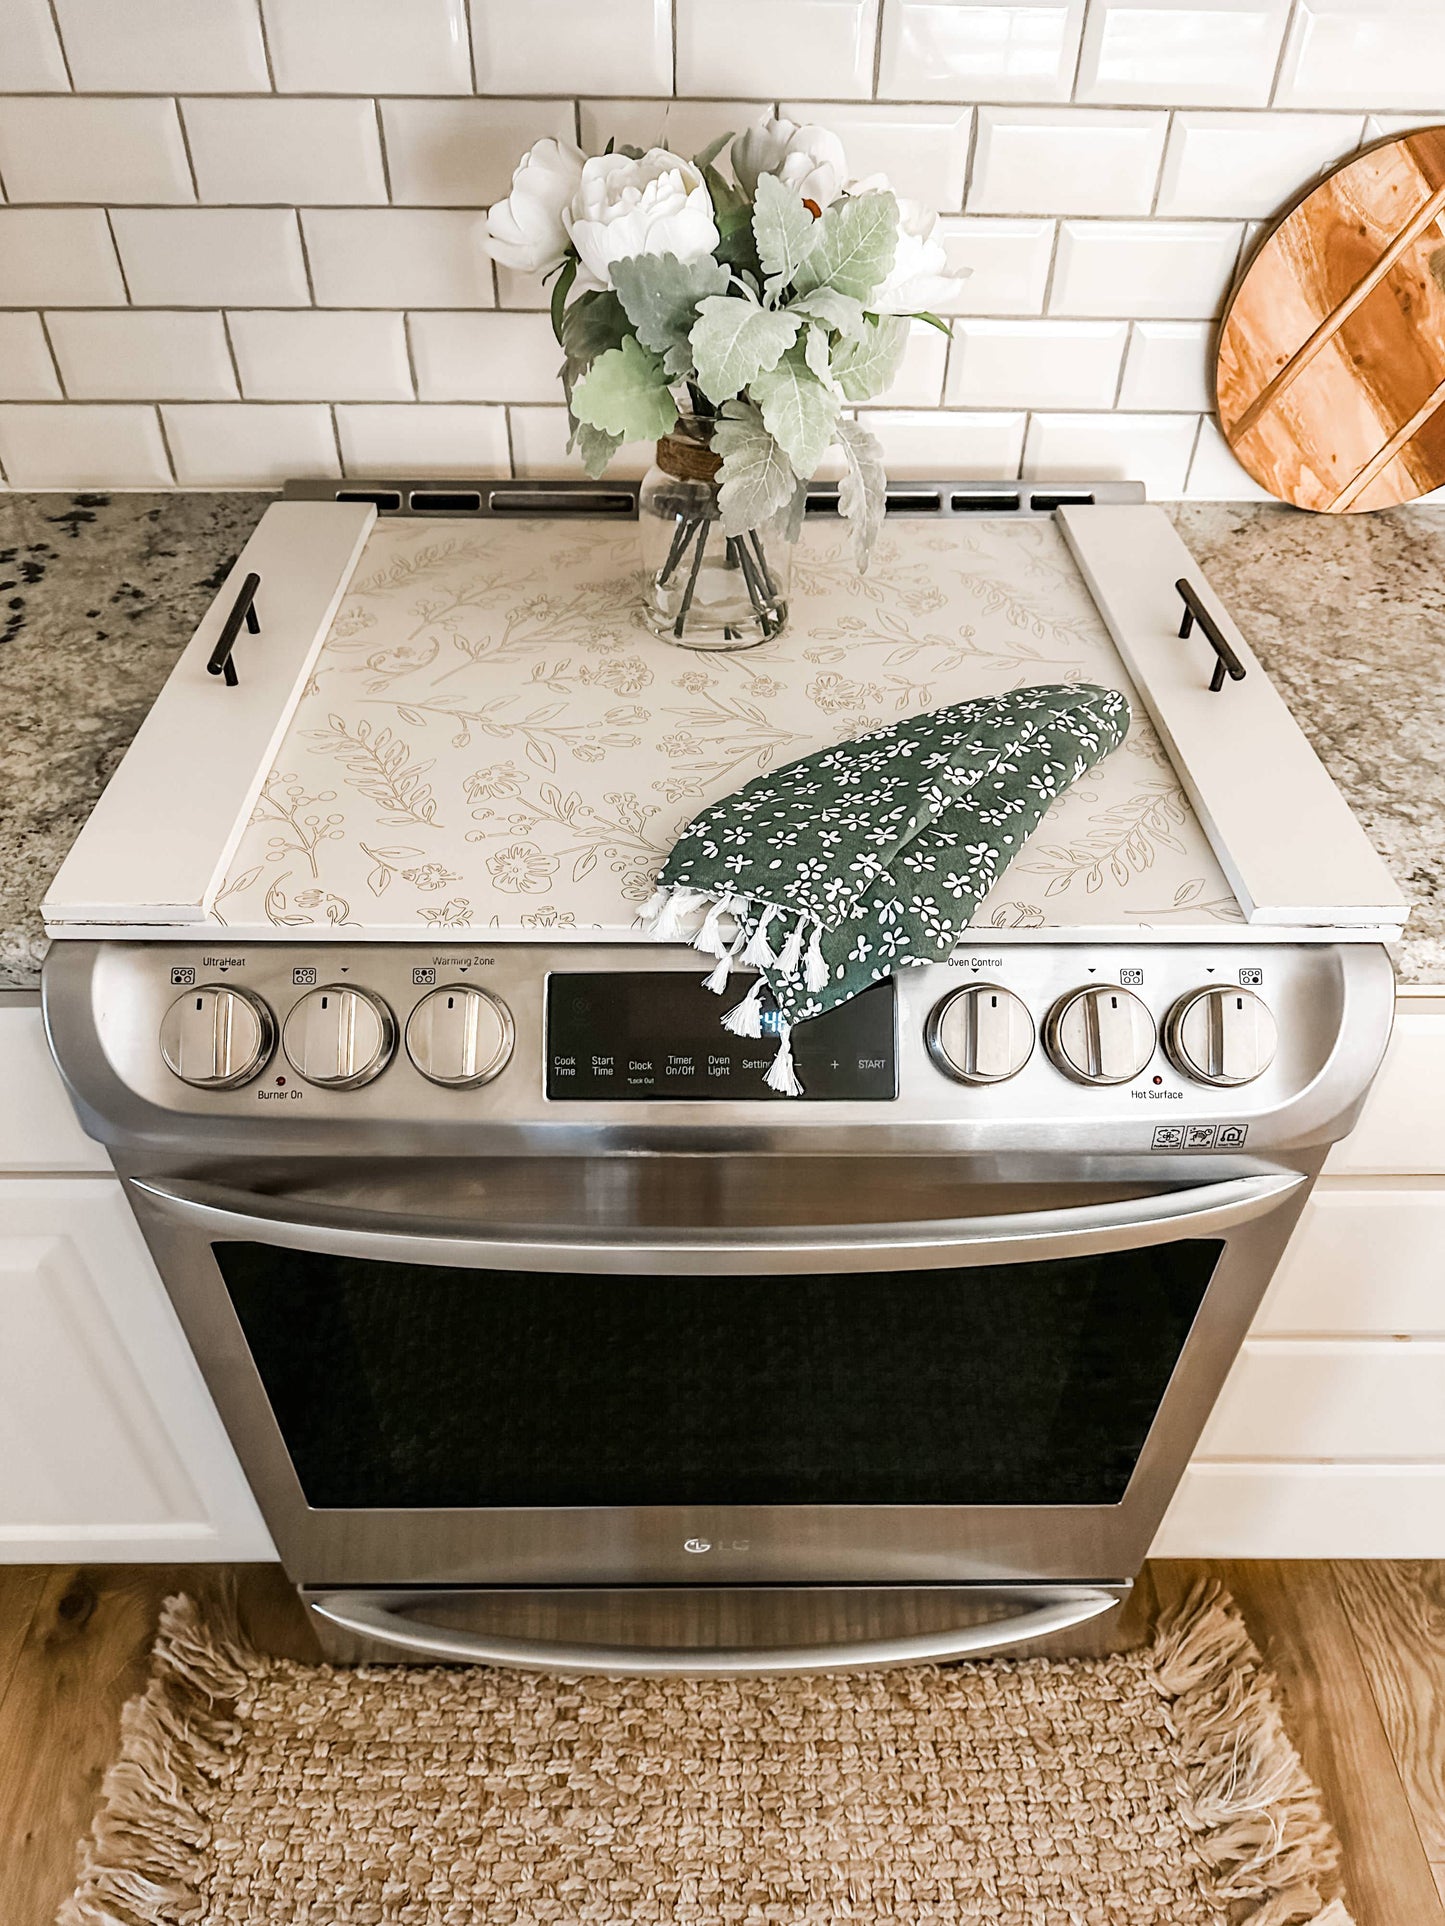 Engraved Floral Pattern Stove Cover, Ivory Distressed